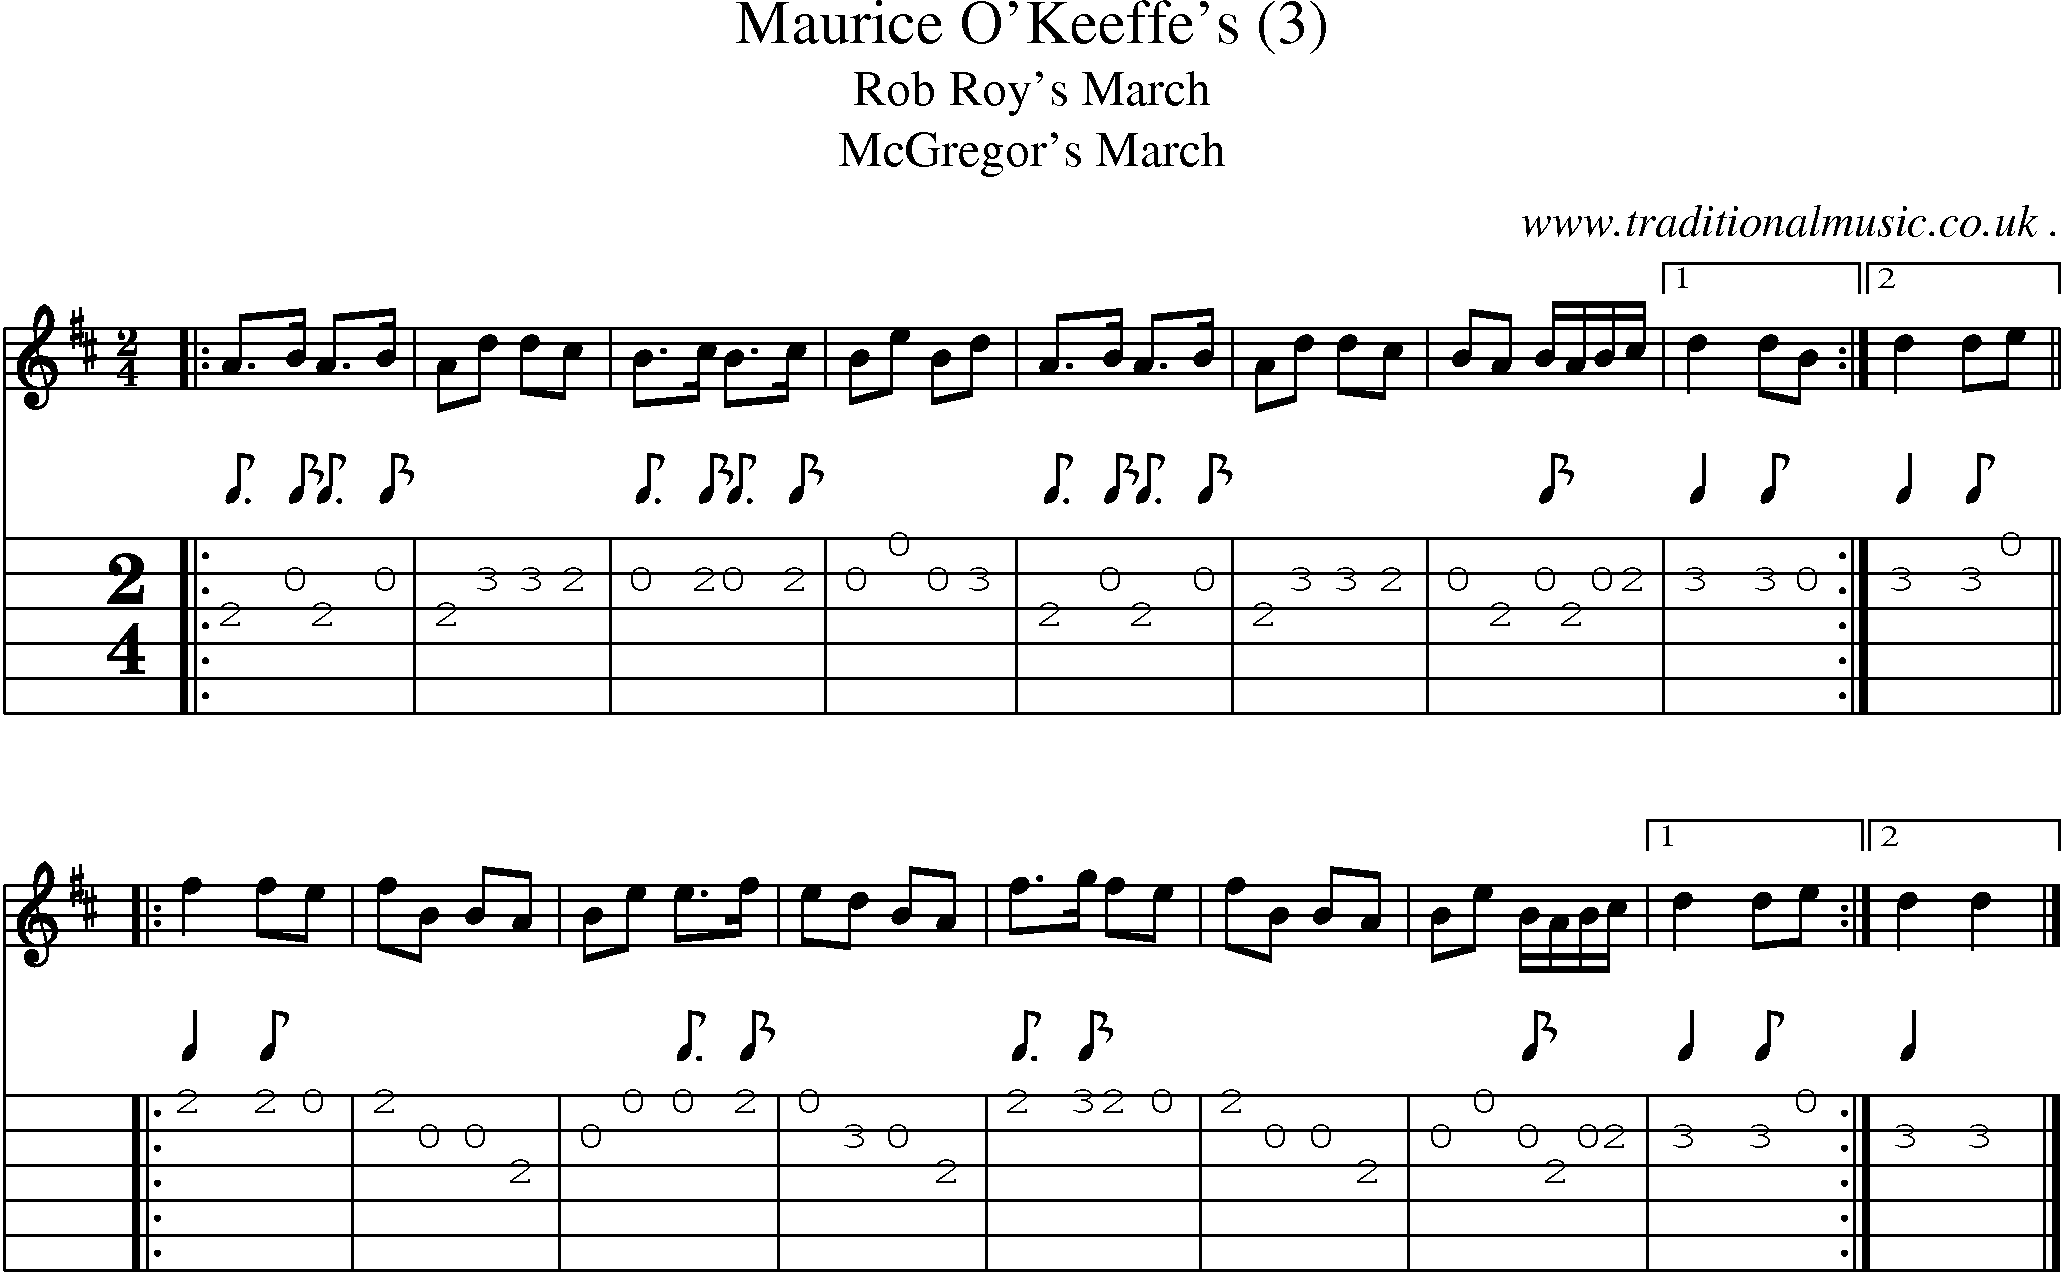 Sheet-music  score, Chords and Guitar Tabs for Maurice Okeeffes 3